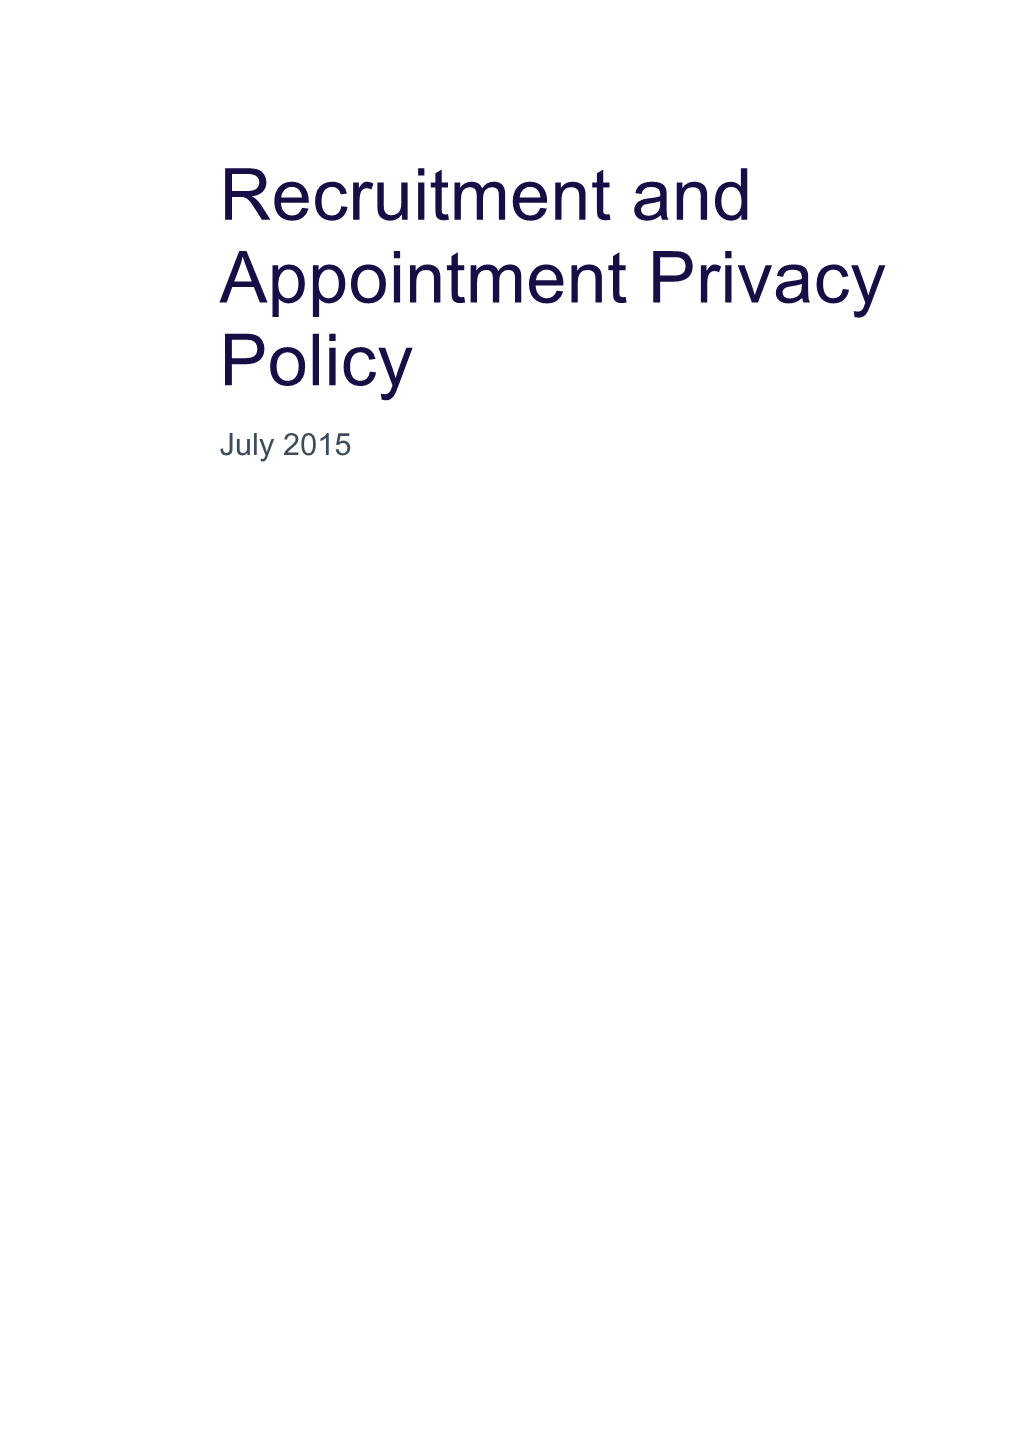 Recruitment and Appointment Privacy Policy